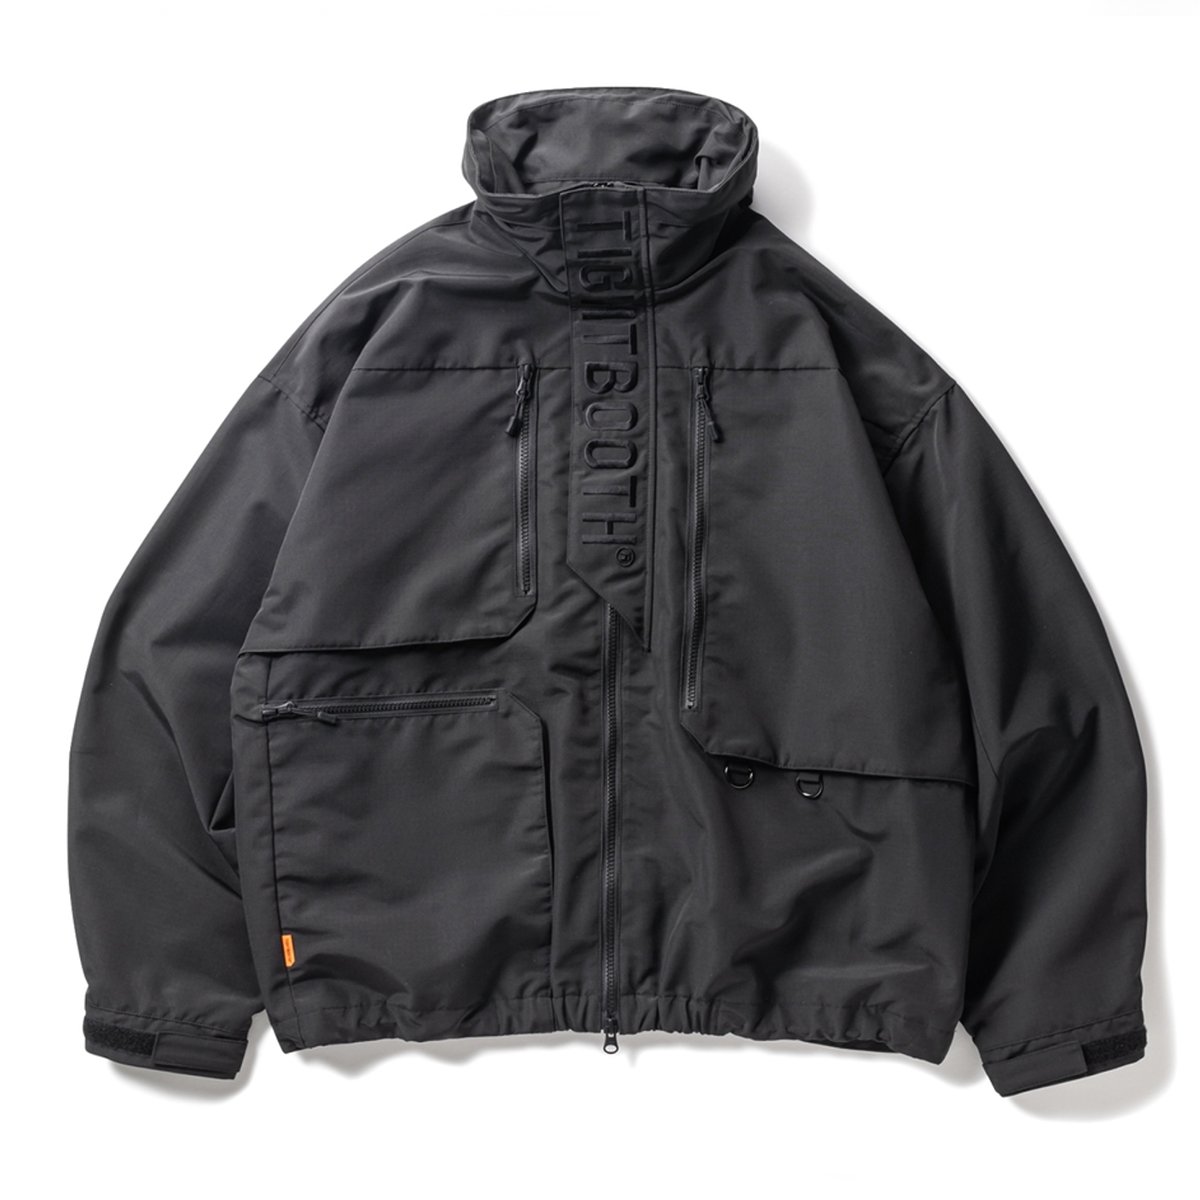 TIGHTBOOTH】Ripstop Tactical JKT (Black)- LIEON SHARE（ライオン